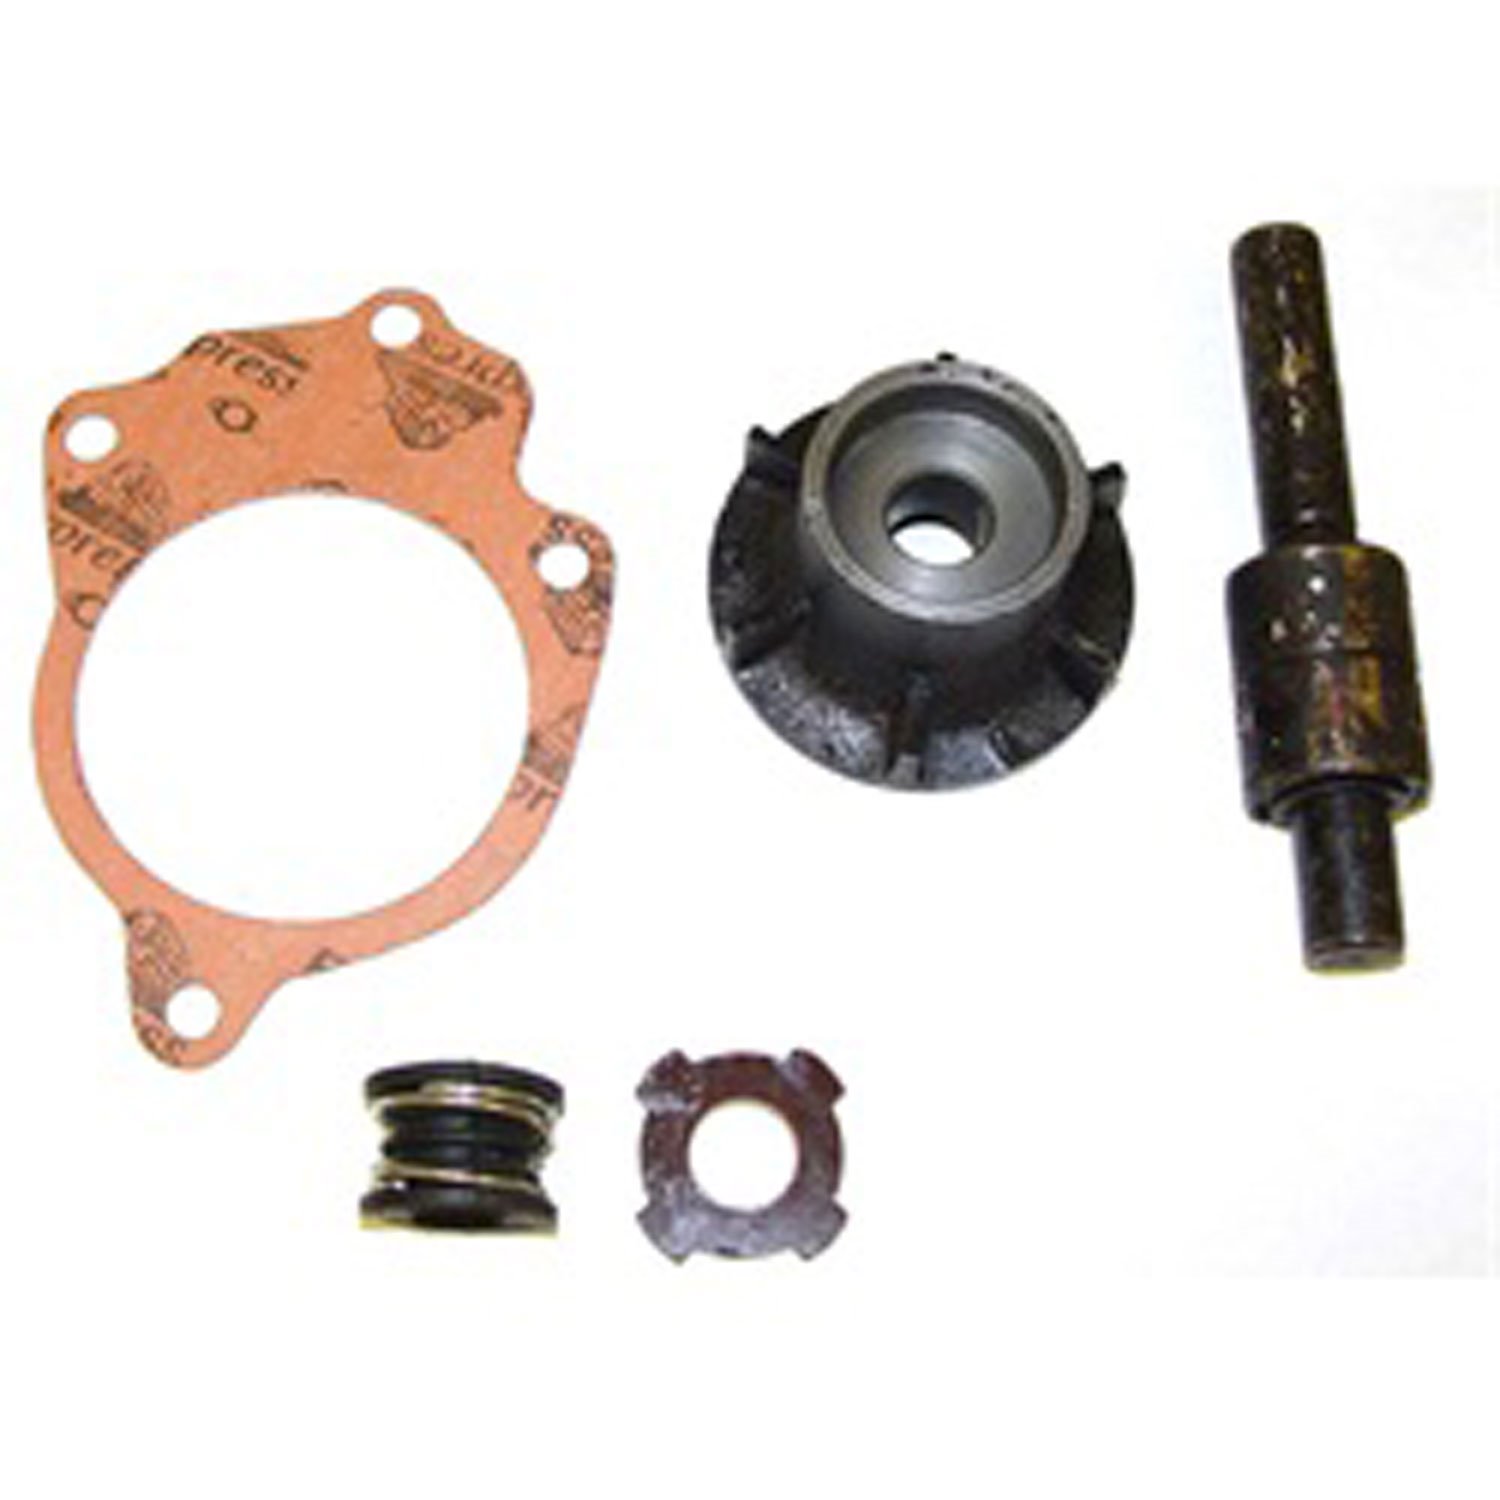 This water pump service kit from Omix-ADA fits 41-71 Ford Willys and Jeep models with 134 cubic inch engines.